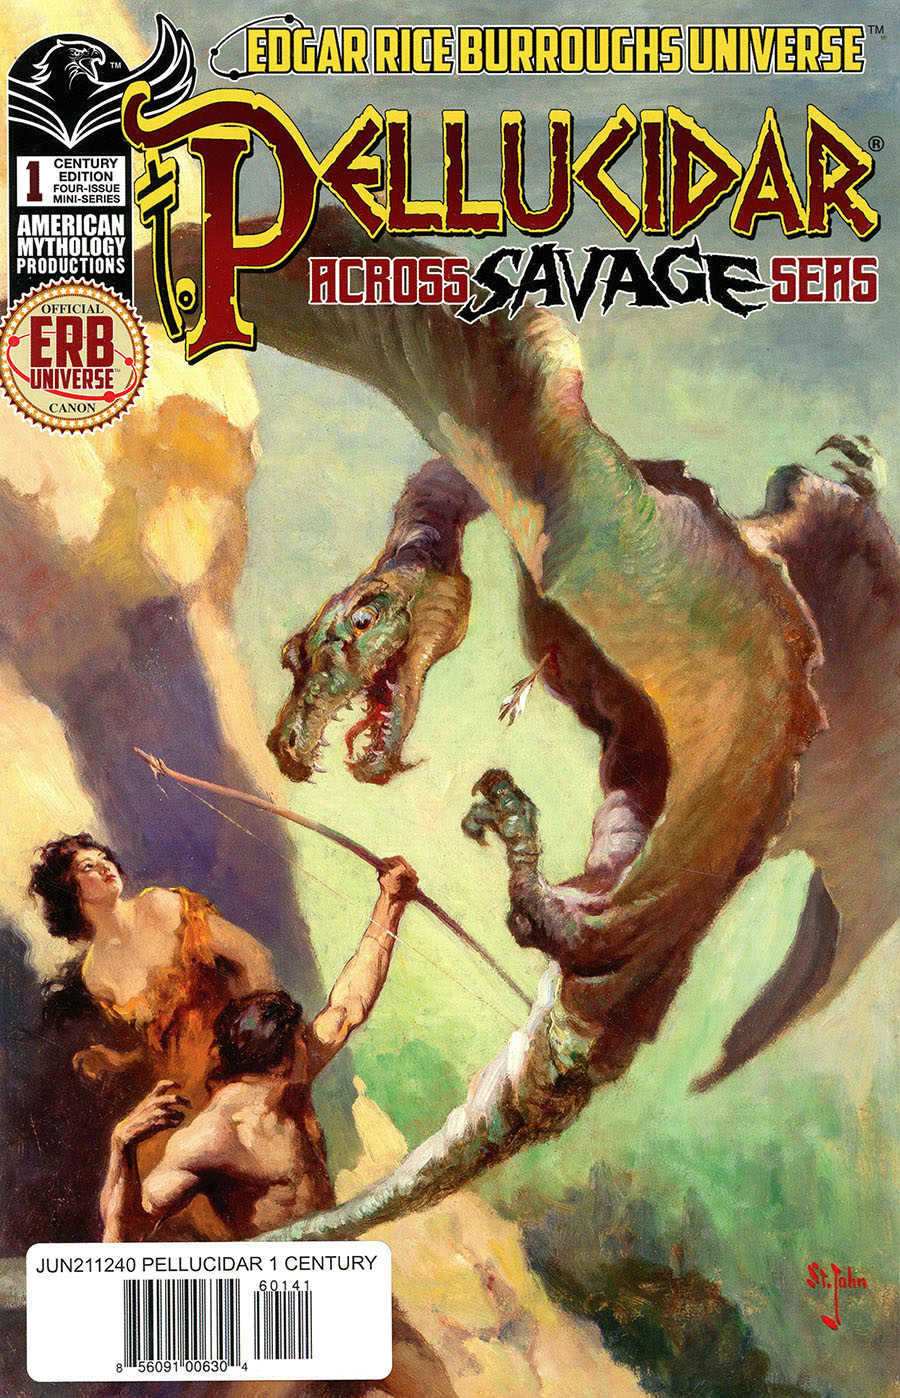 Pellucidar Across Savage Seas #1 Cover D Limited Edition Century Variant Cover